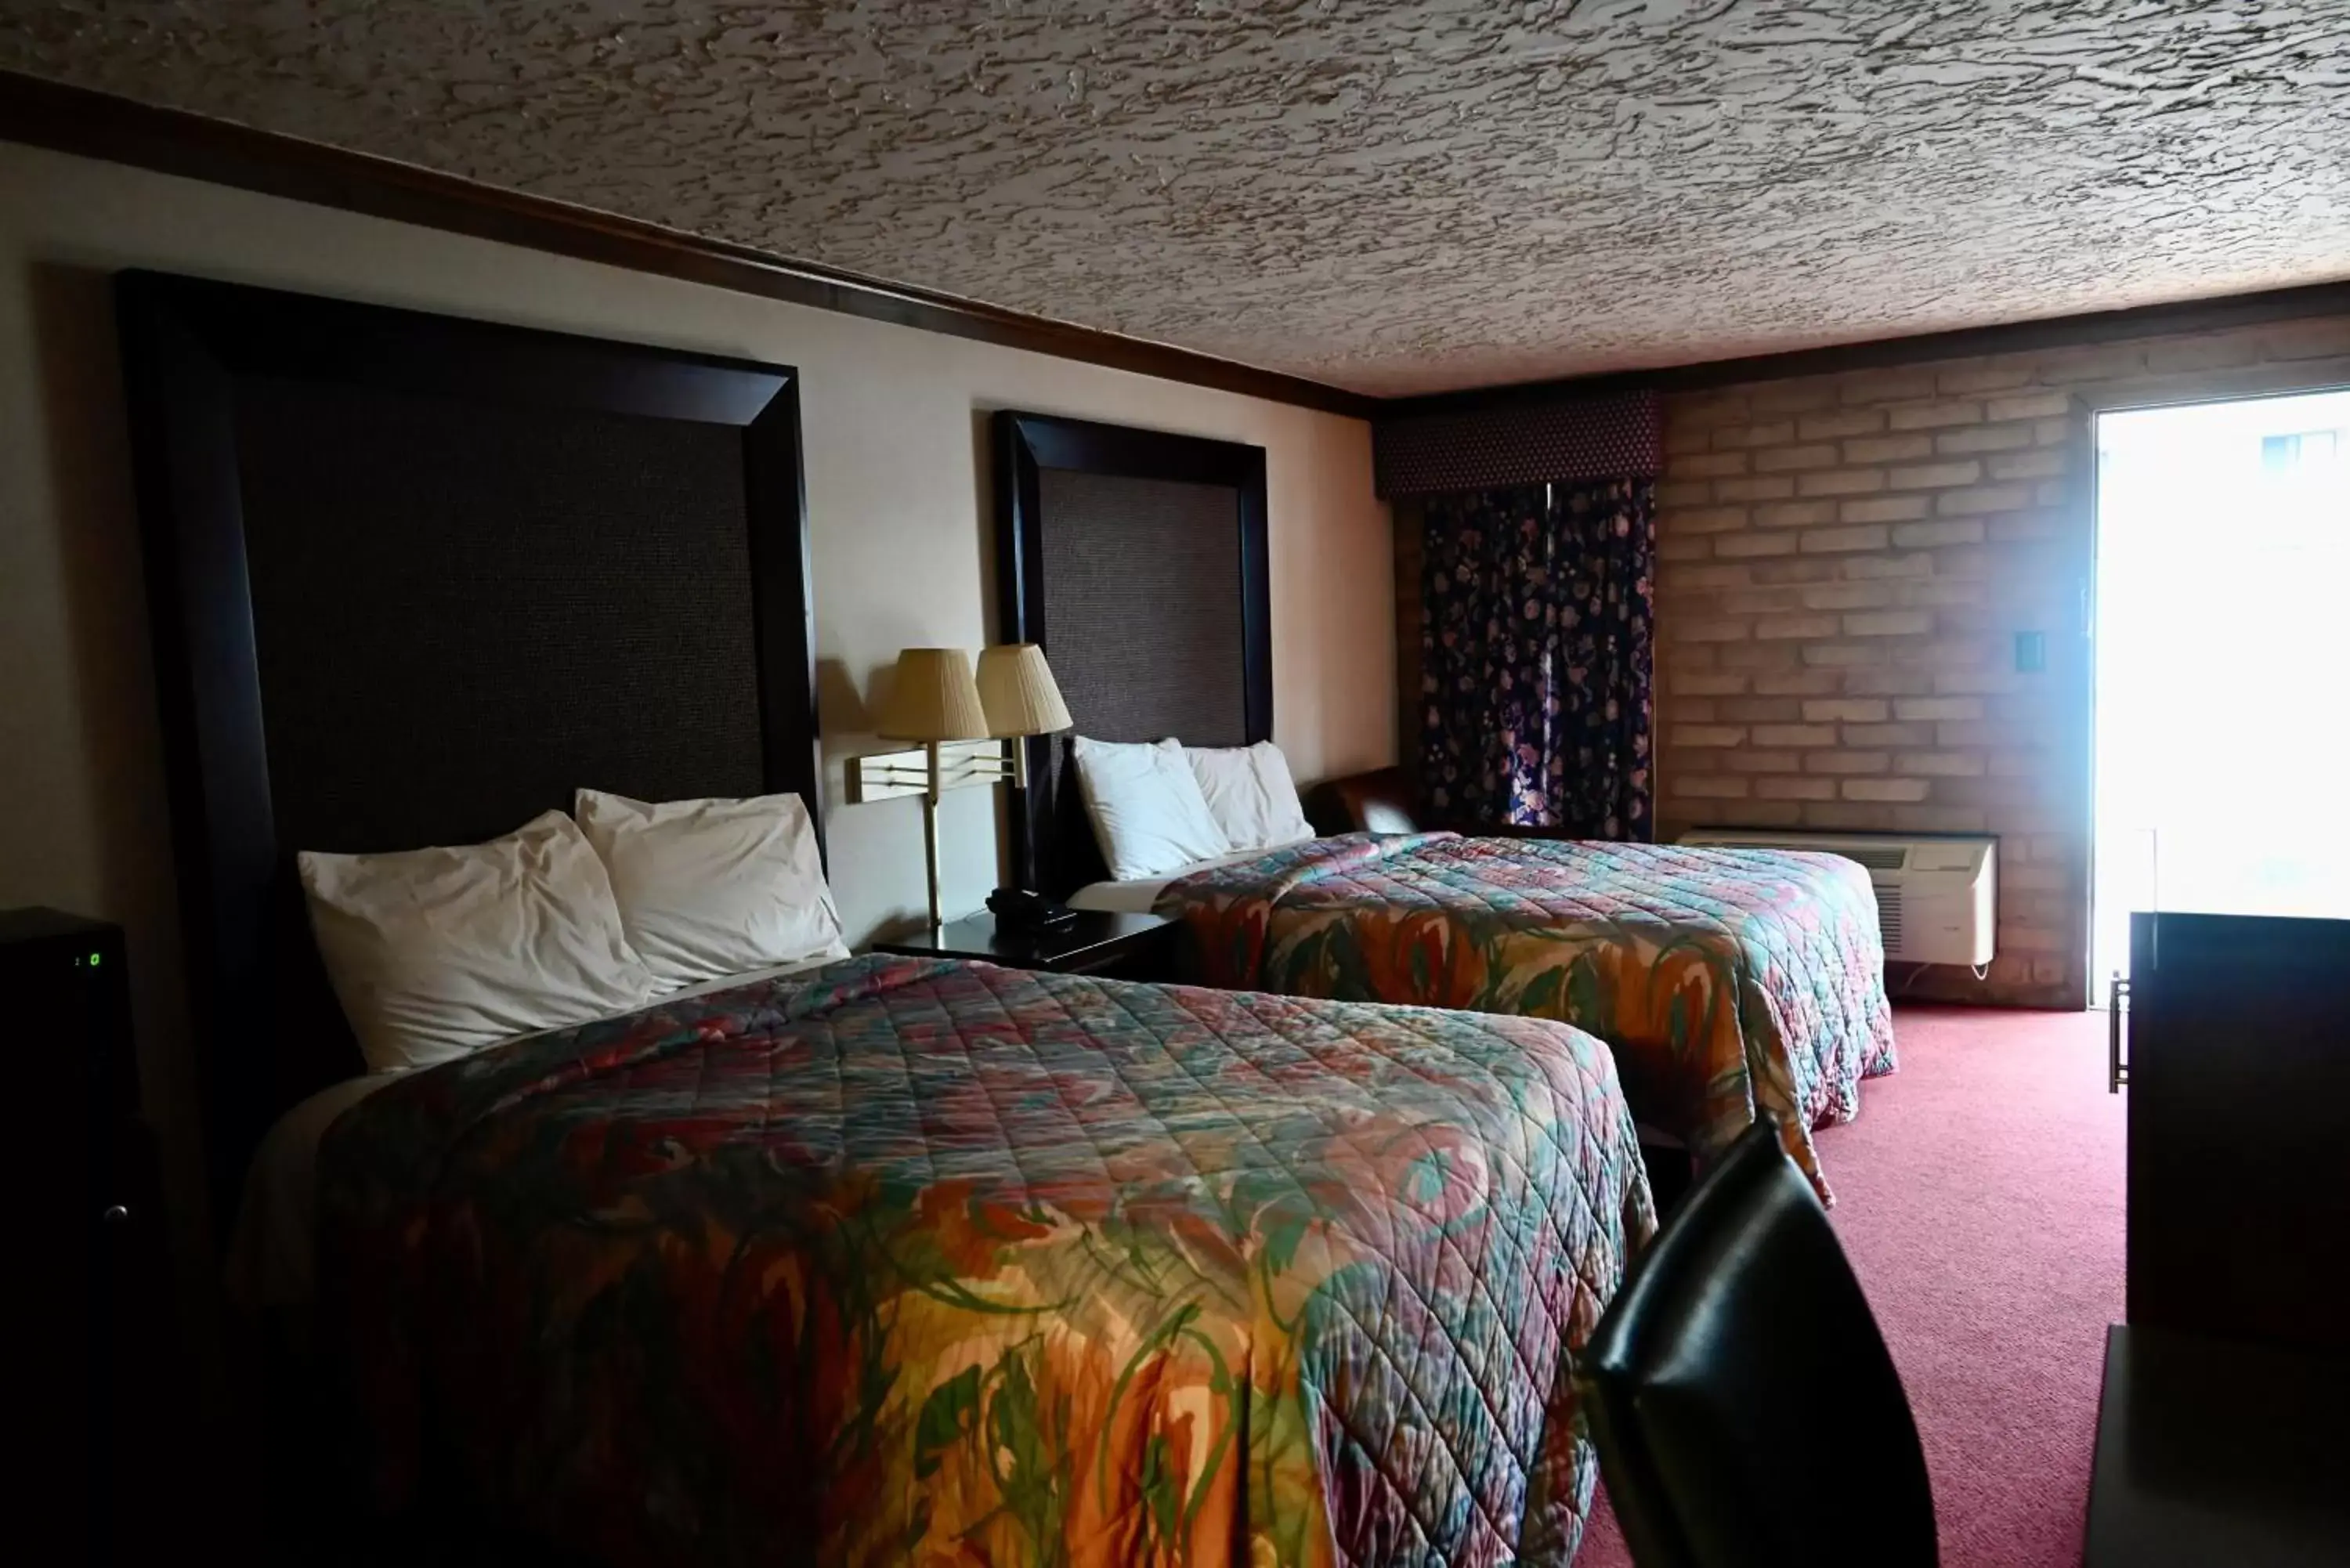 Bed in Rittiman Inn and Suites